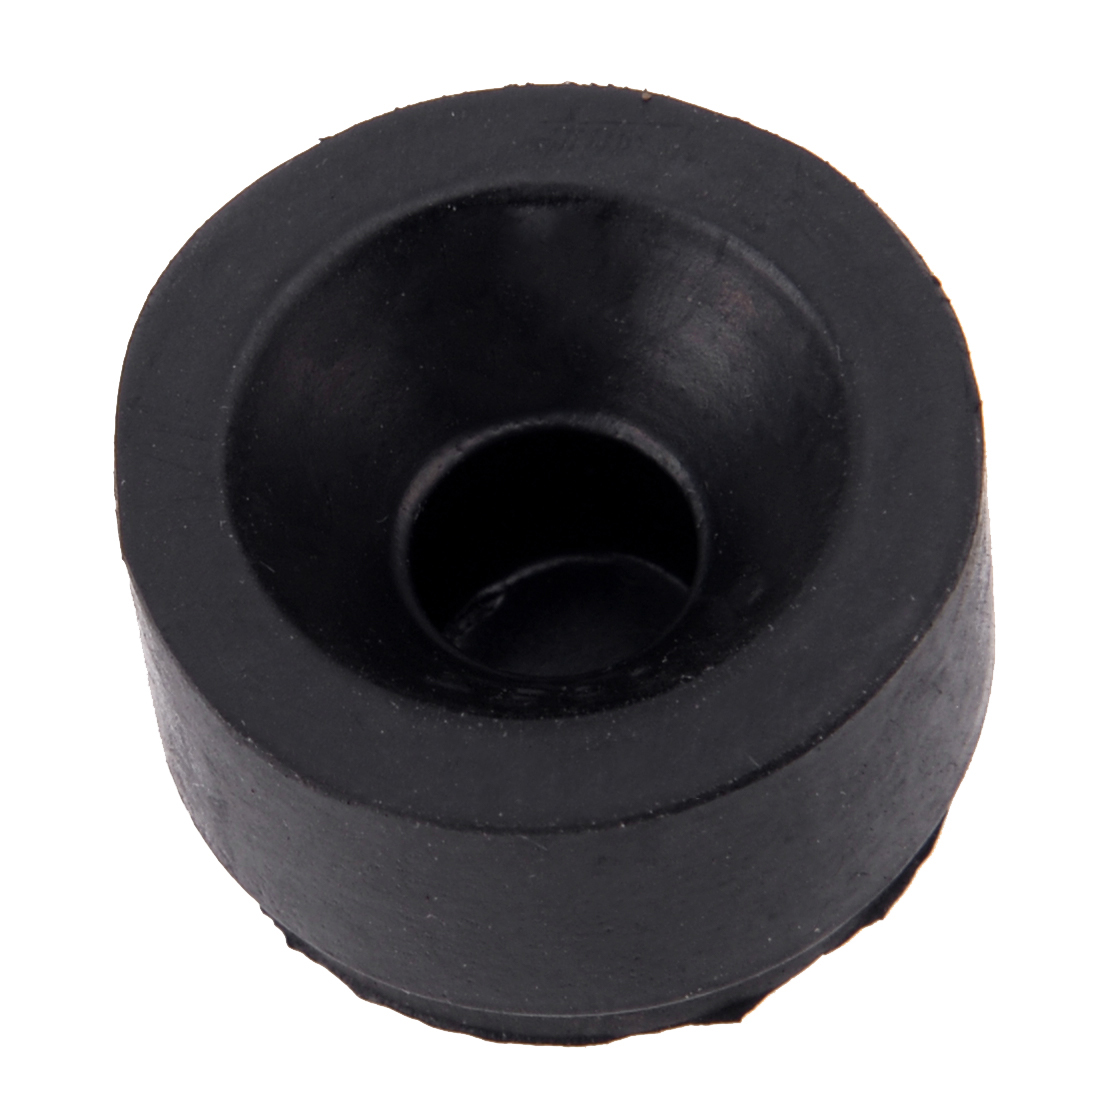 LETAOSK 4pcs Engine Cover Rubber Mounting Bush Grommet Cushion Fit For Ford Focus C-Max S-Max Galaxy Mondeo 